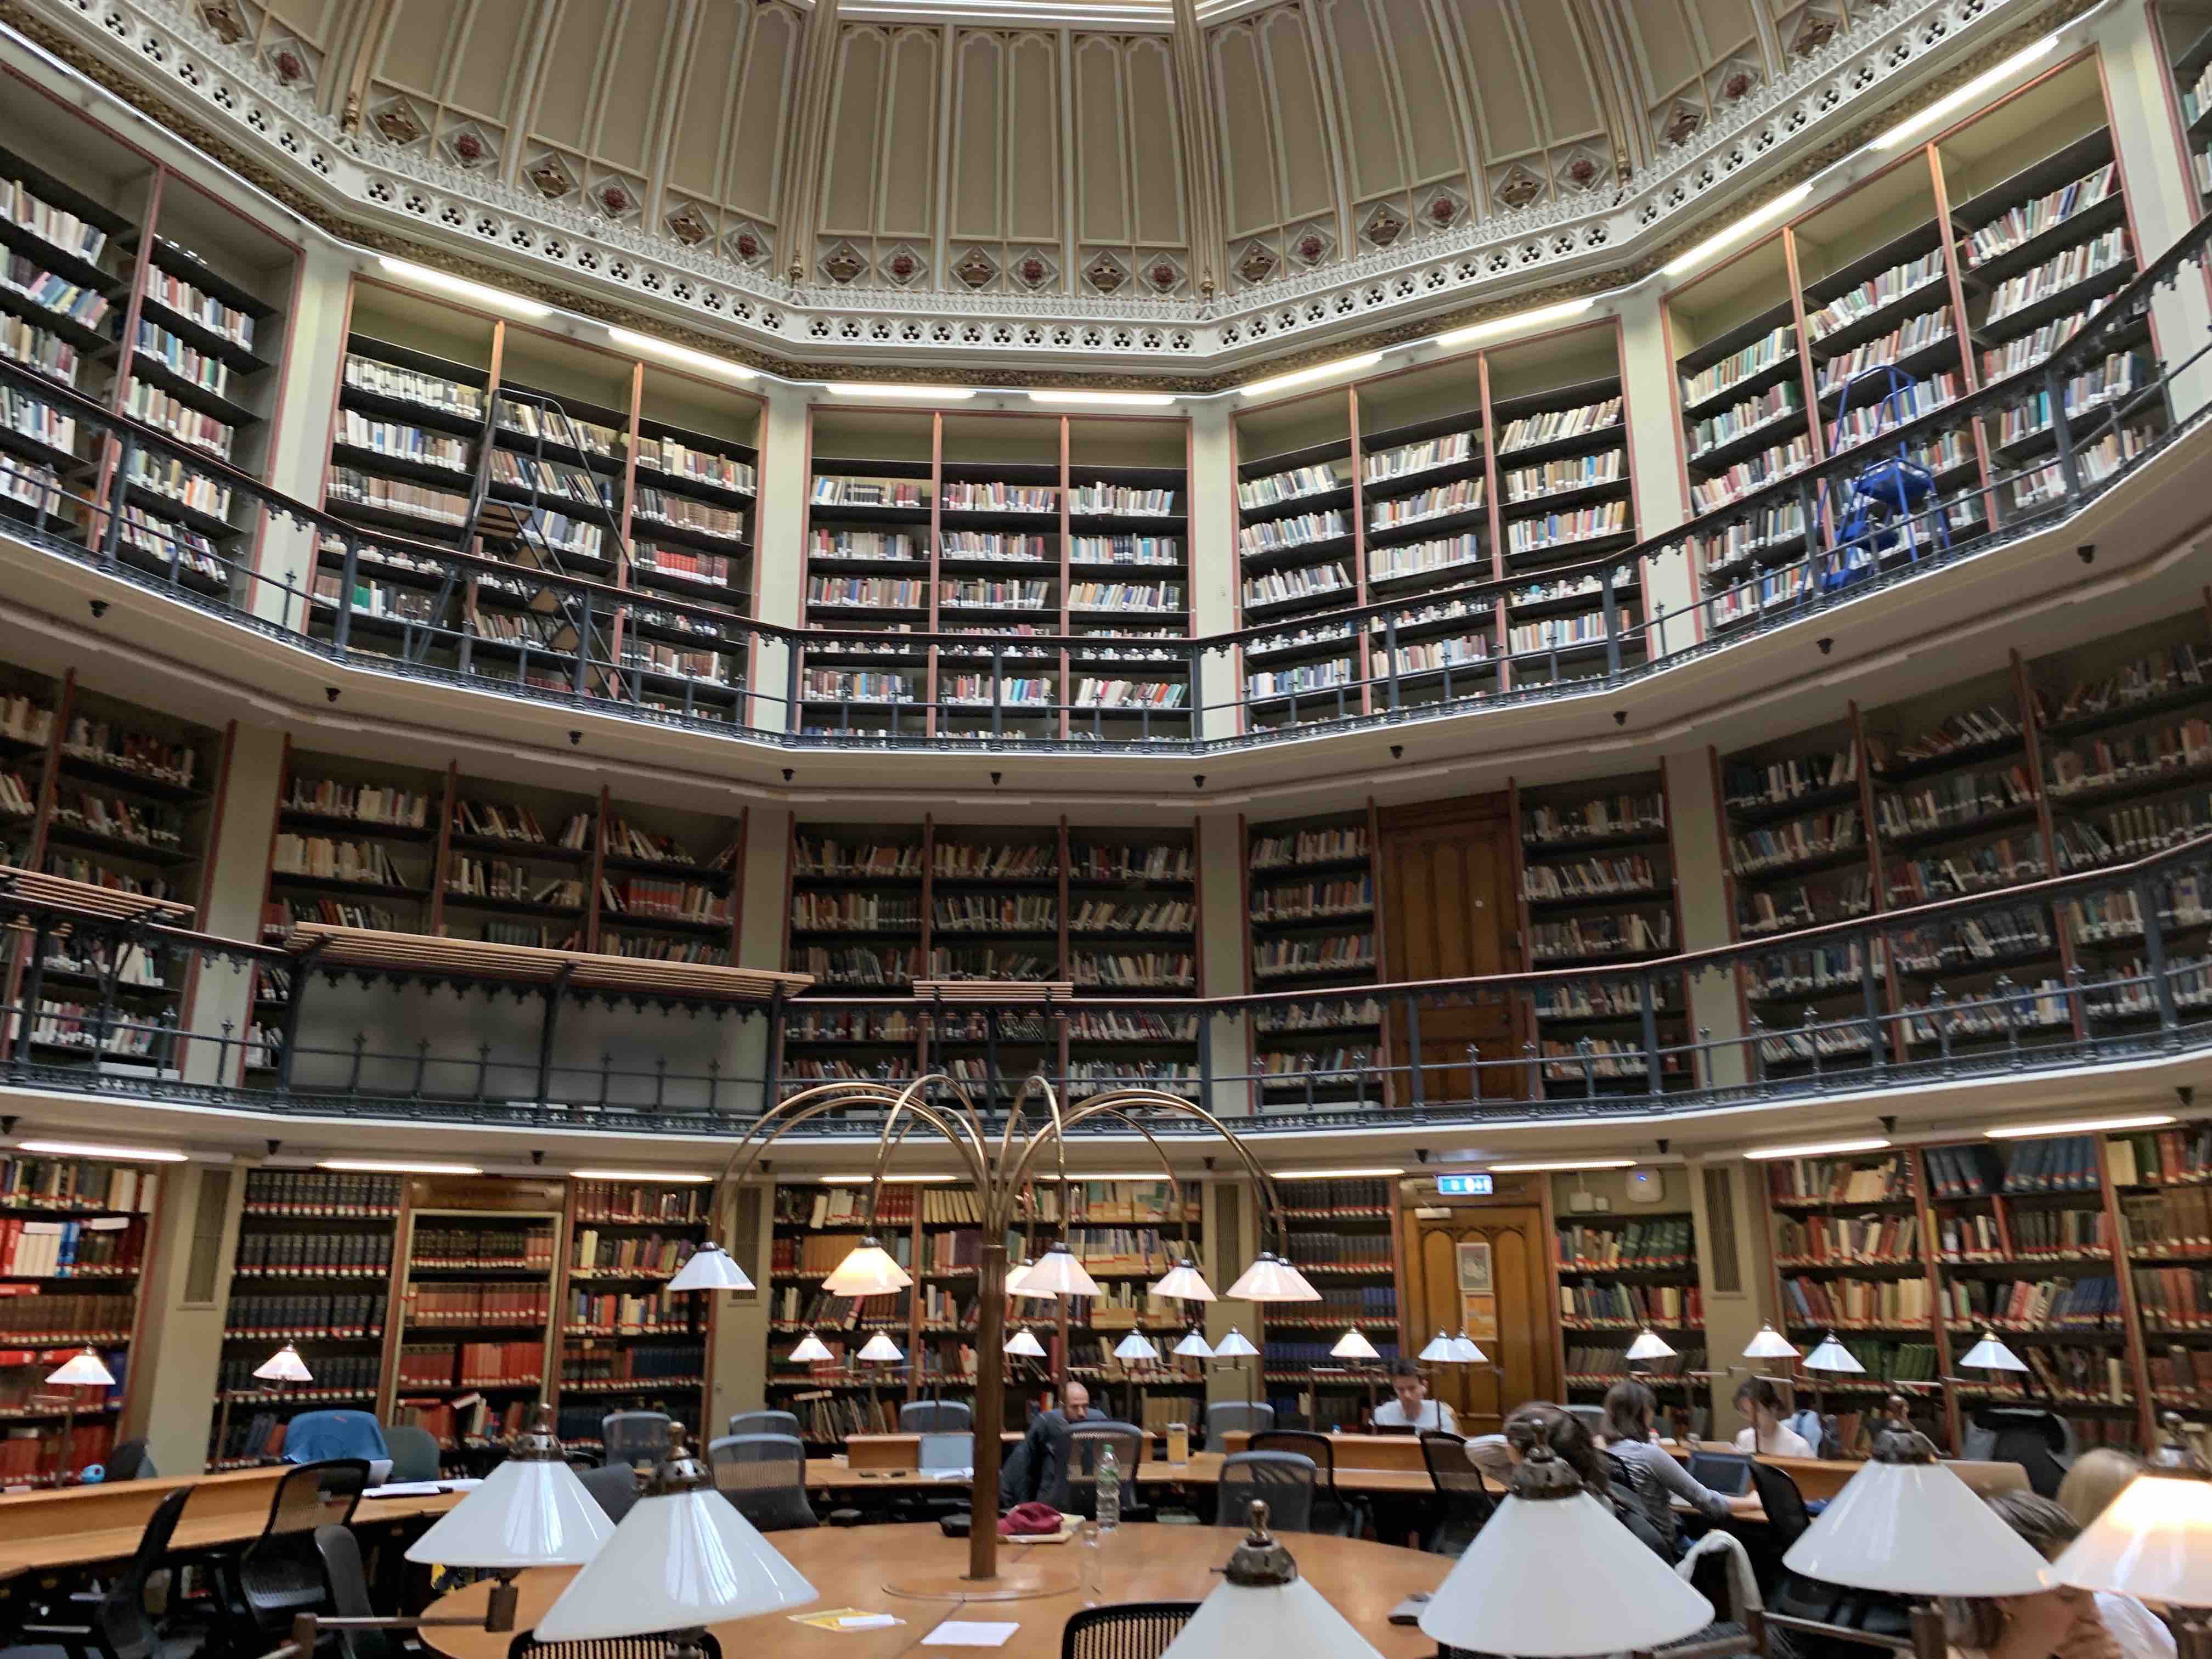 Three-tiered round reading room of the Maughan Library